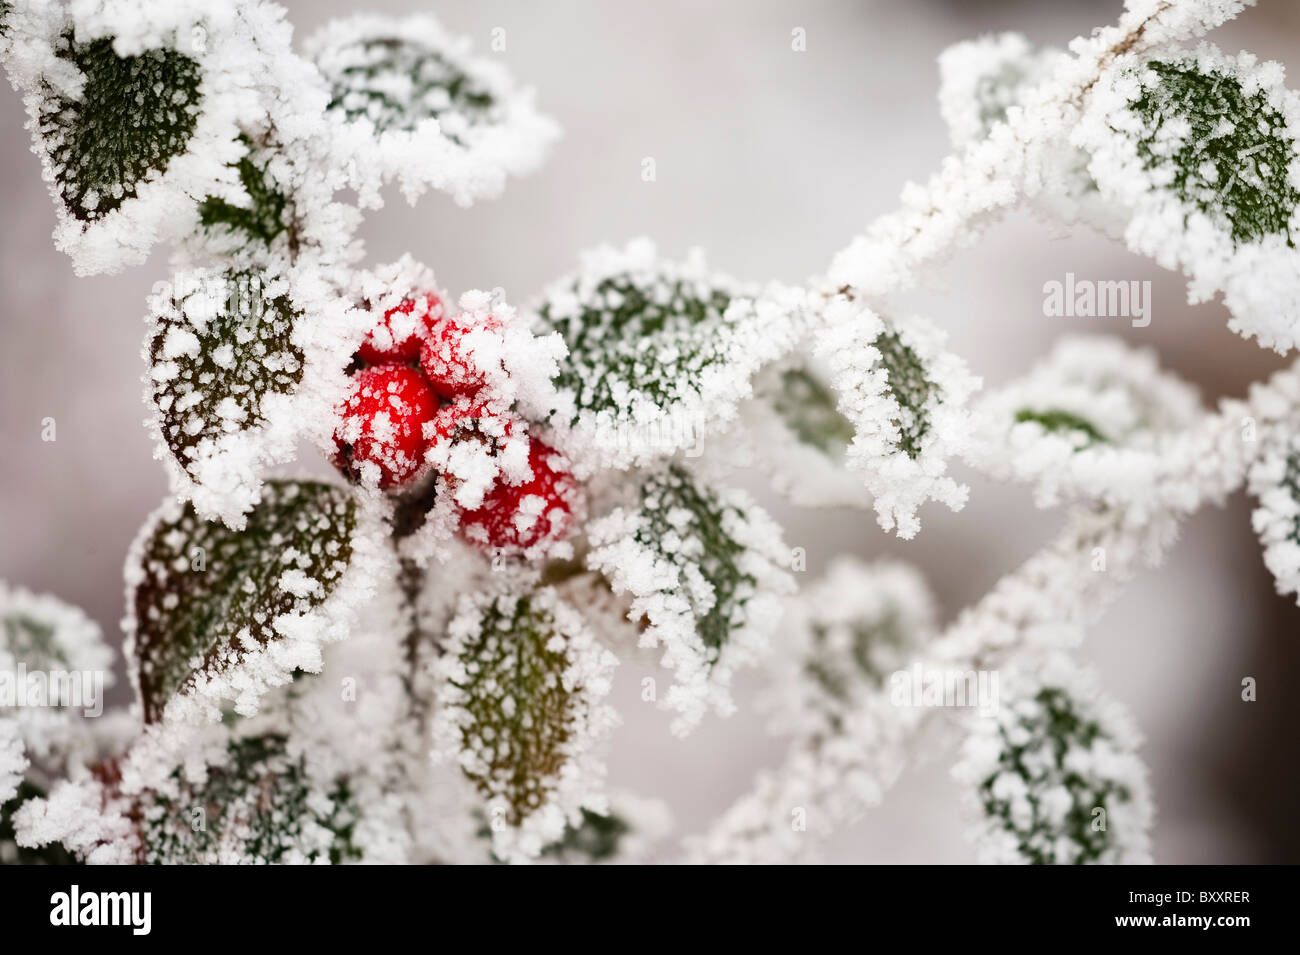 Cotoneaster leaves and berries covered by a hoar frost in winter Stock Photo